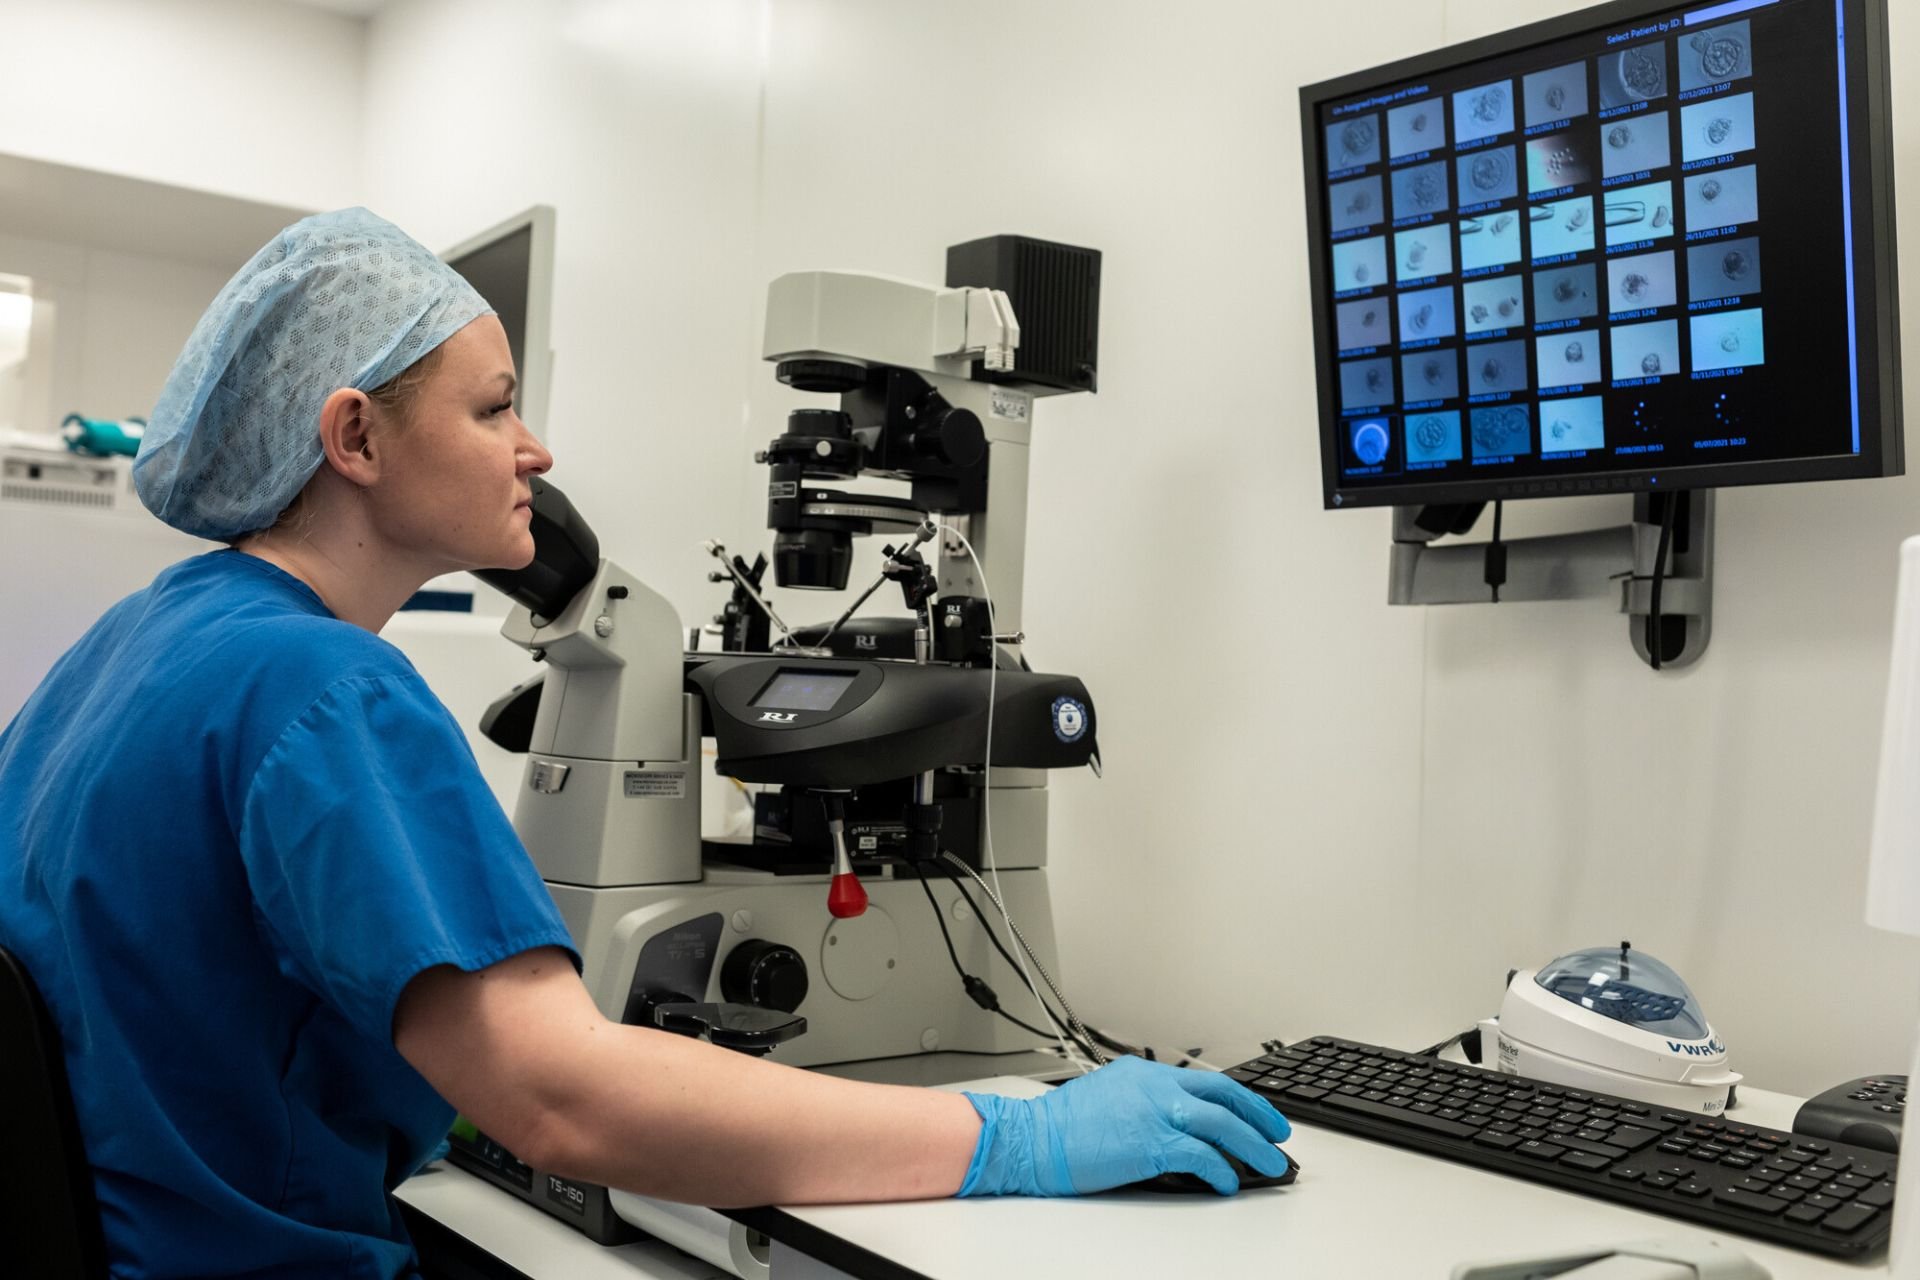 embryologist wearing scrubs and a hat, sitting next to a microscope, looking at a screen with embryos at different developmental stages. 